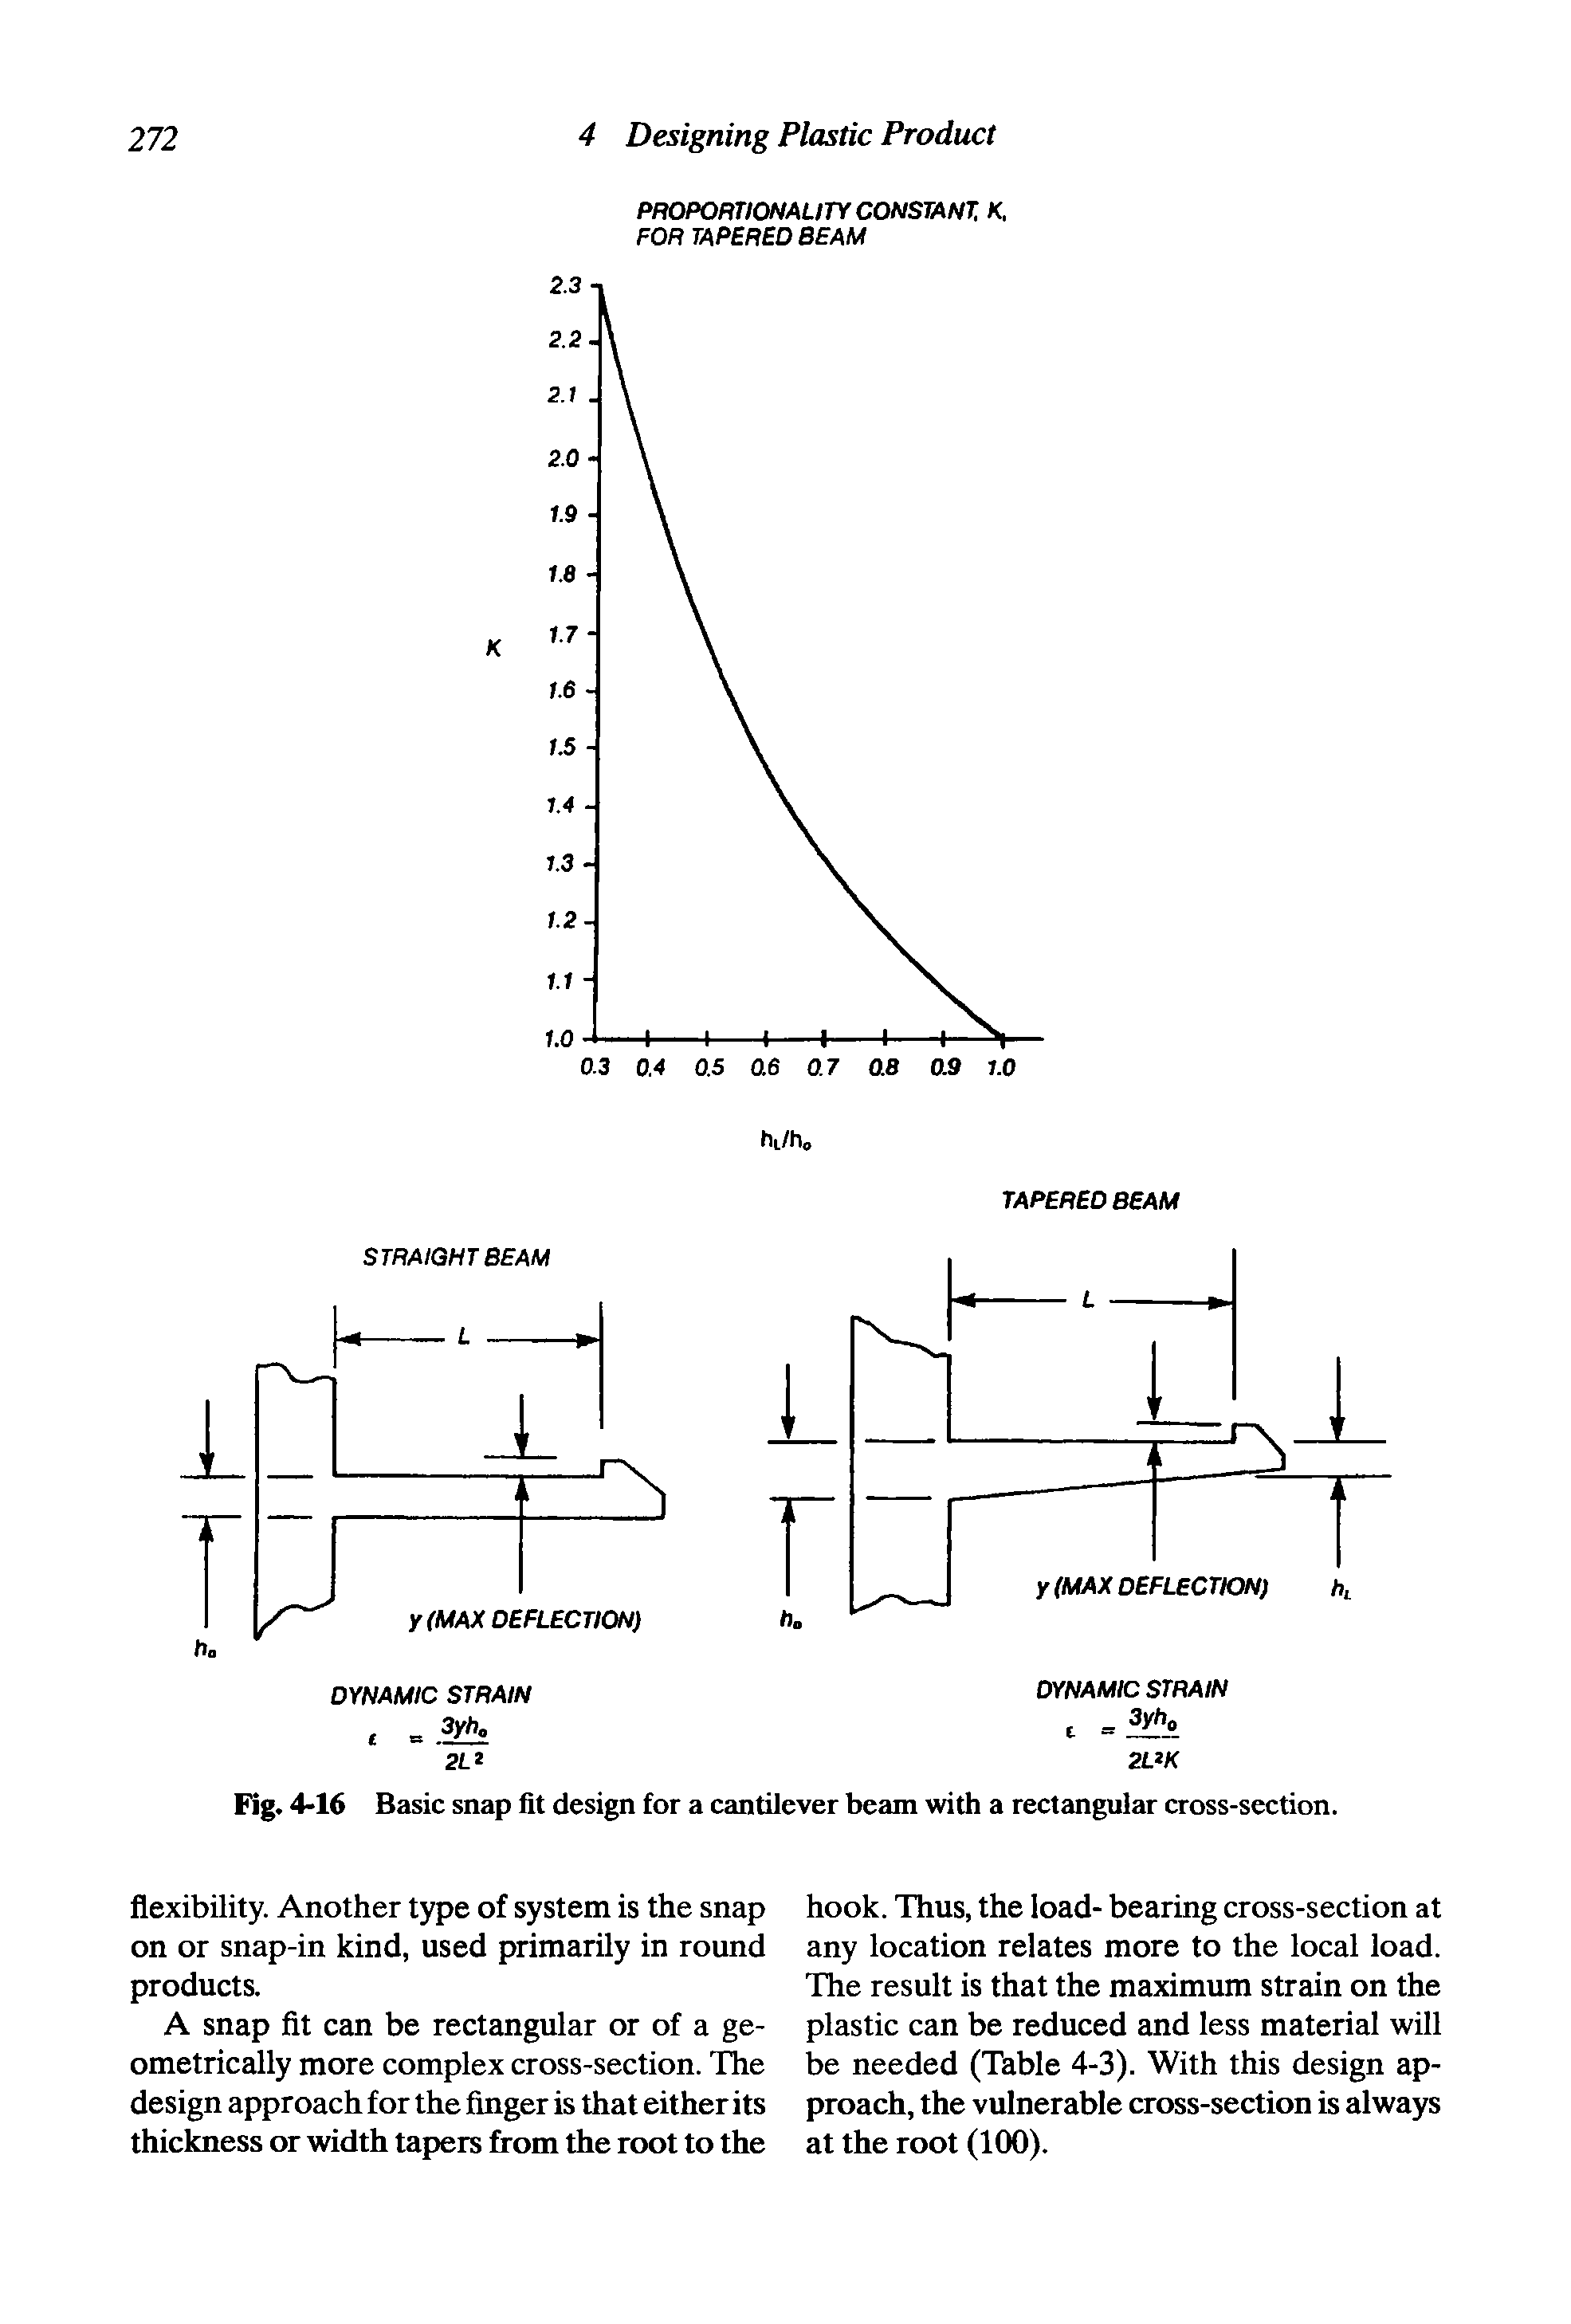 Fig. 4-16 Basic snap fit design for a cantilever beam with a rectangular cross-section.